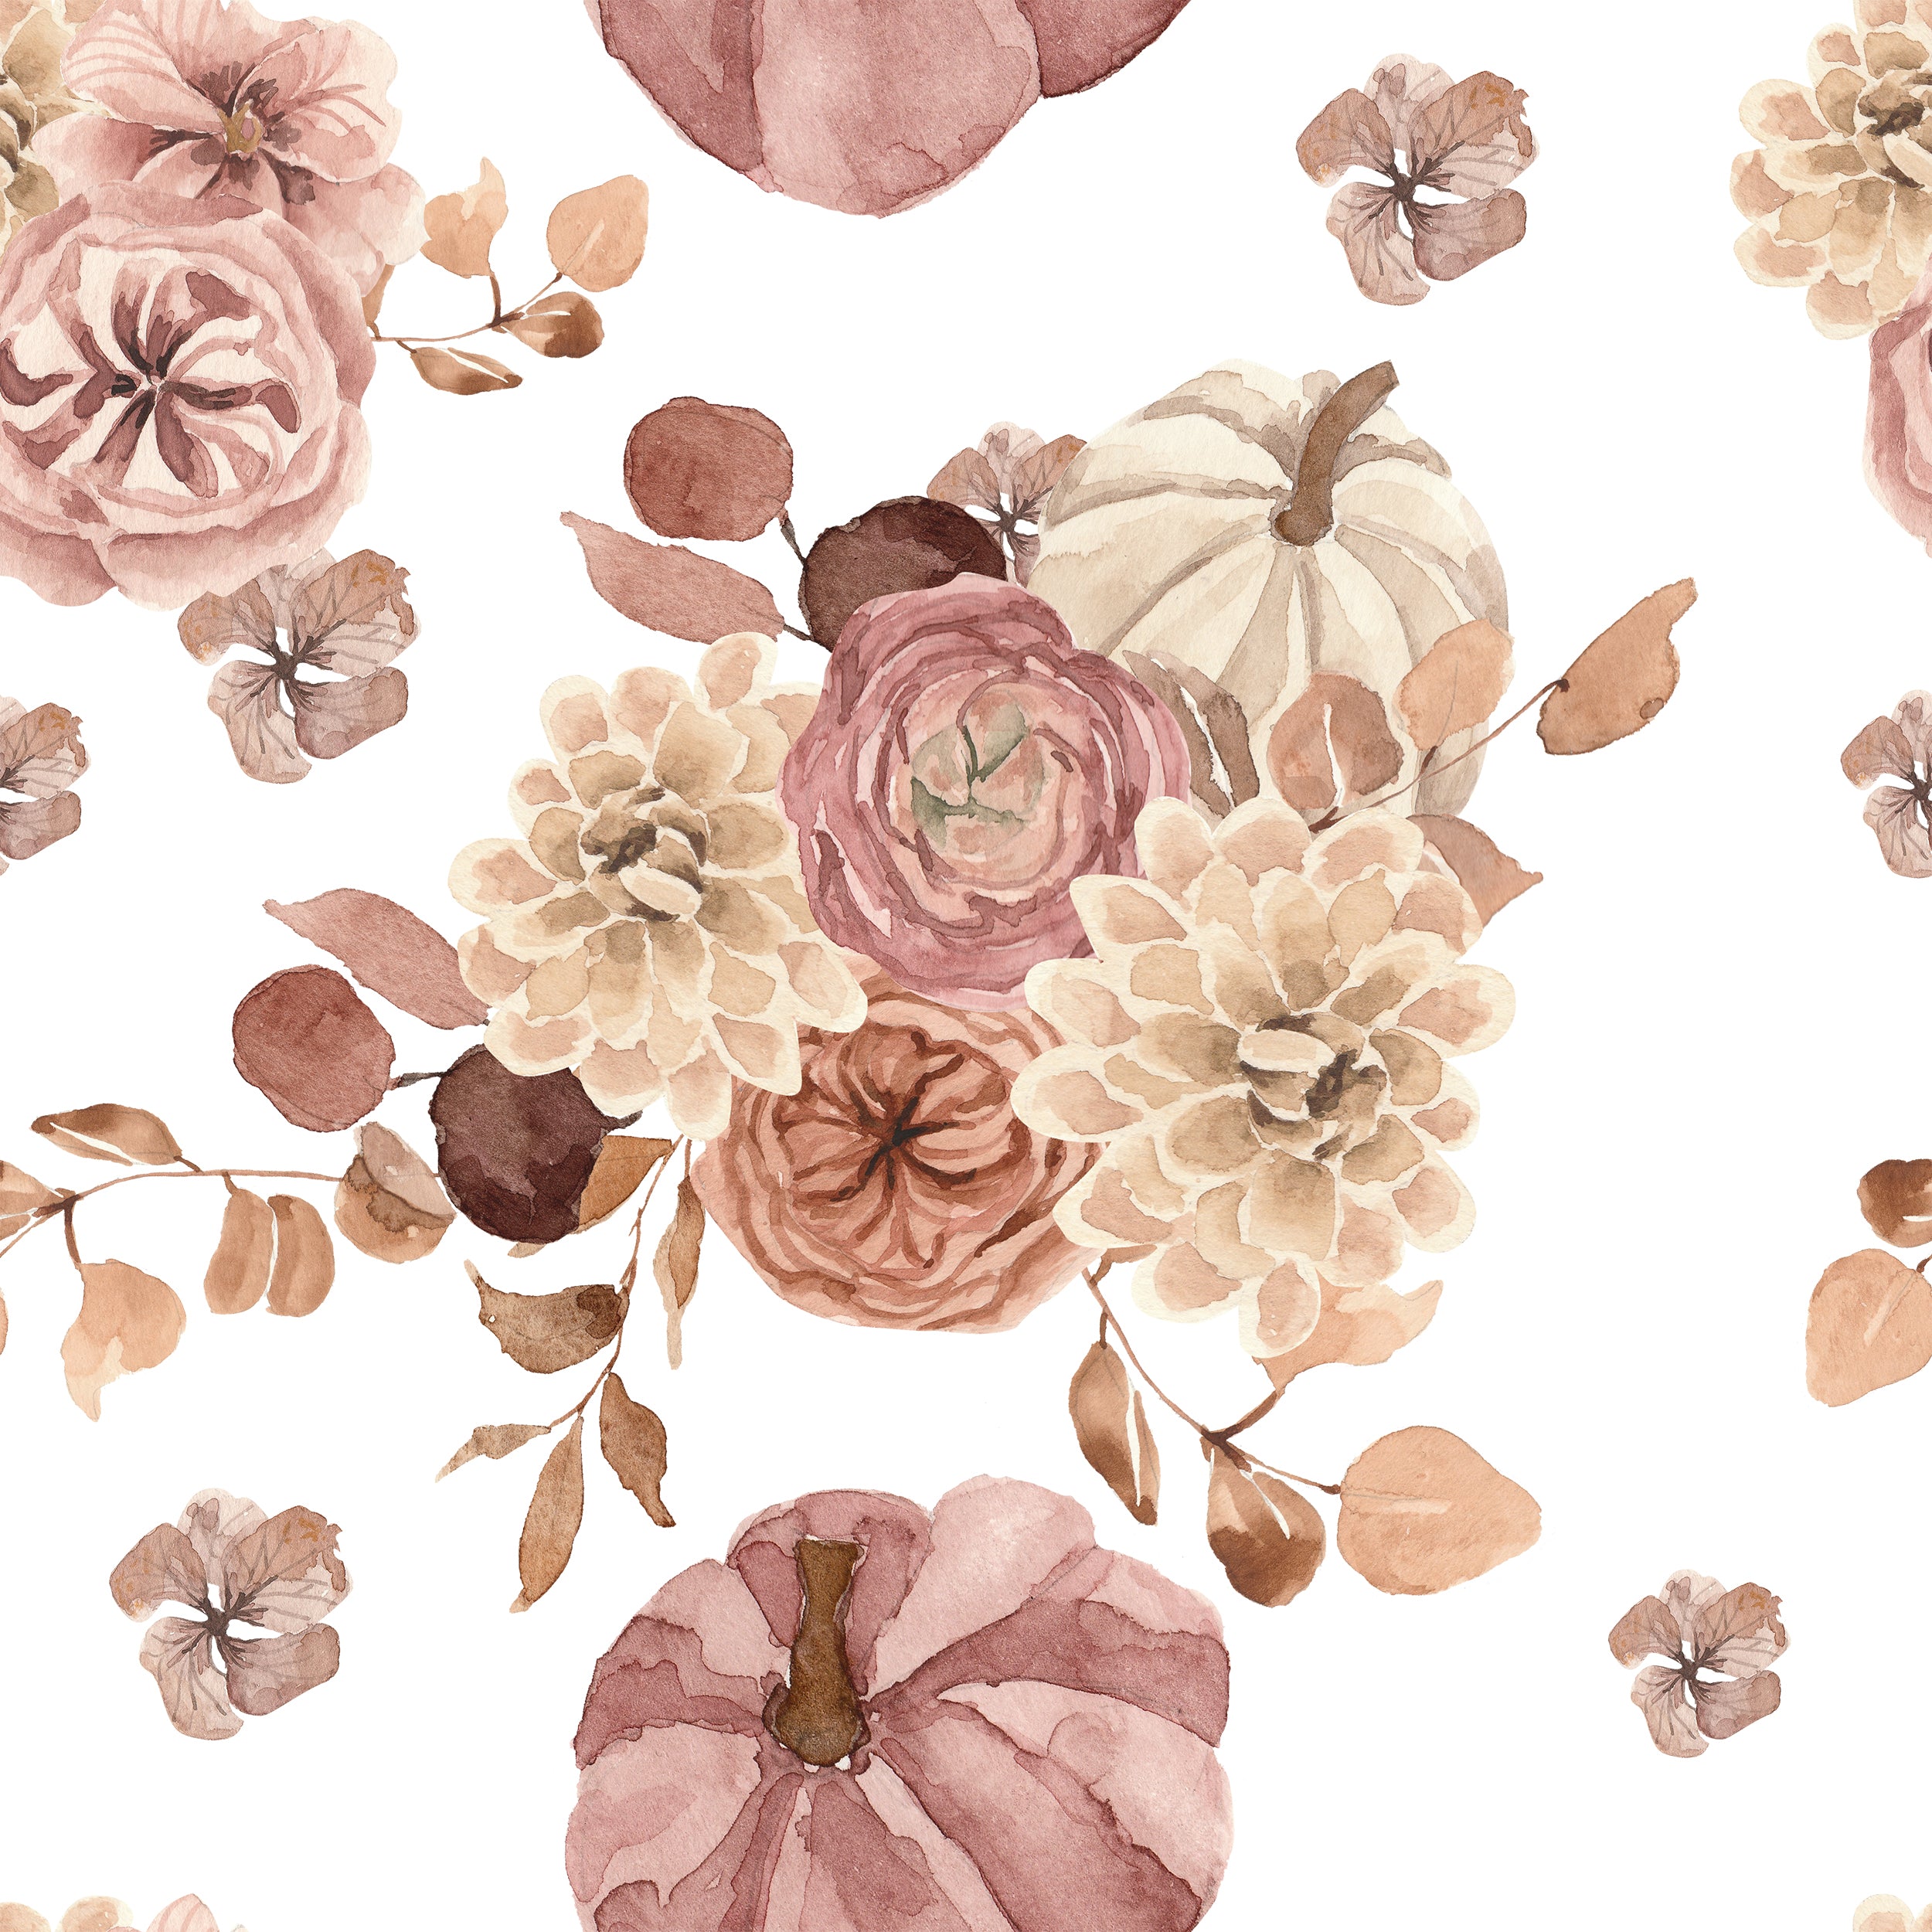 Close-up of the Pumpkin Spice Wallpaper showing a detailed floral design with watercolor pumpkins, roses, and hydrangeas in shades of pink, beige, and brown. The soft, muted colors and the organic layout of the elements give the wallpaper a gentle, autumnal feel.